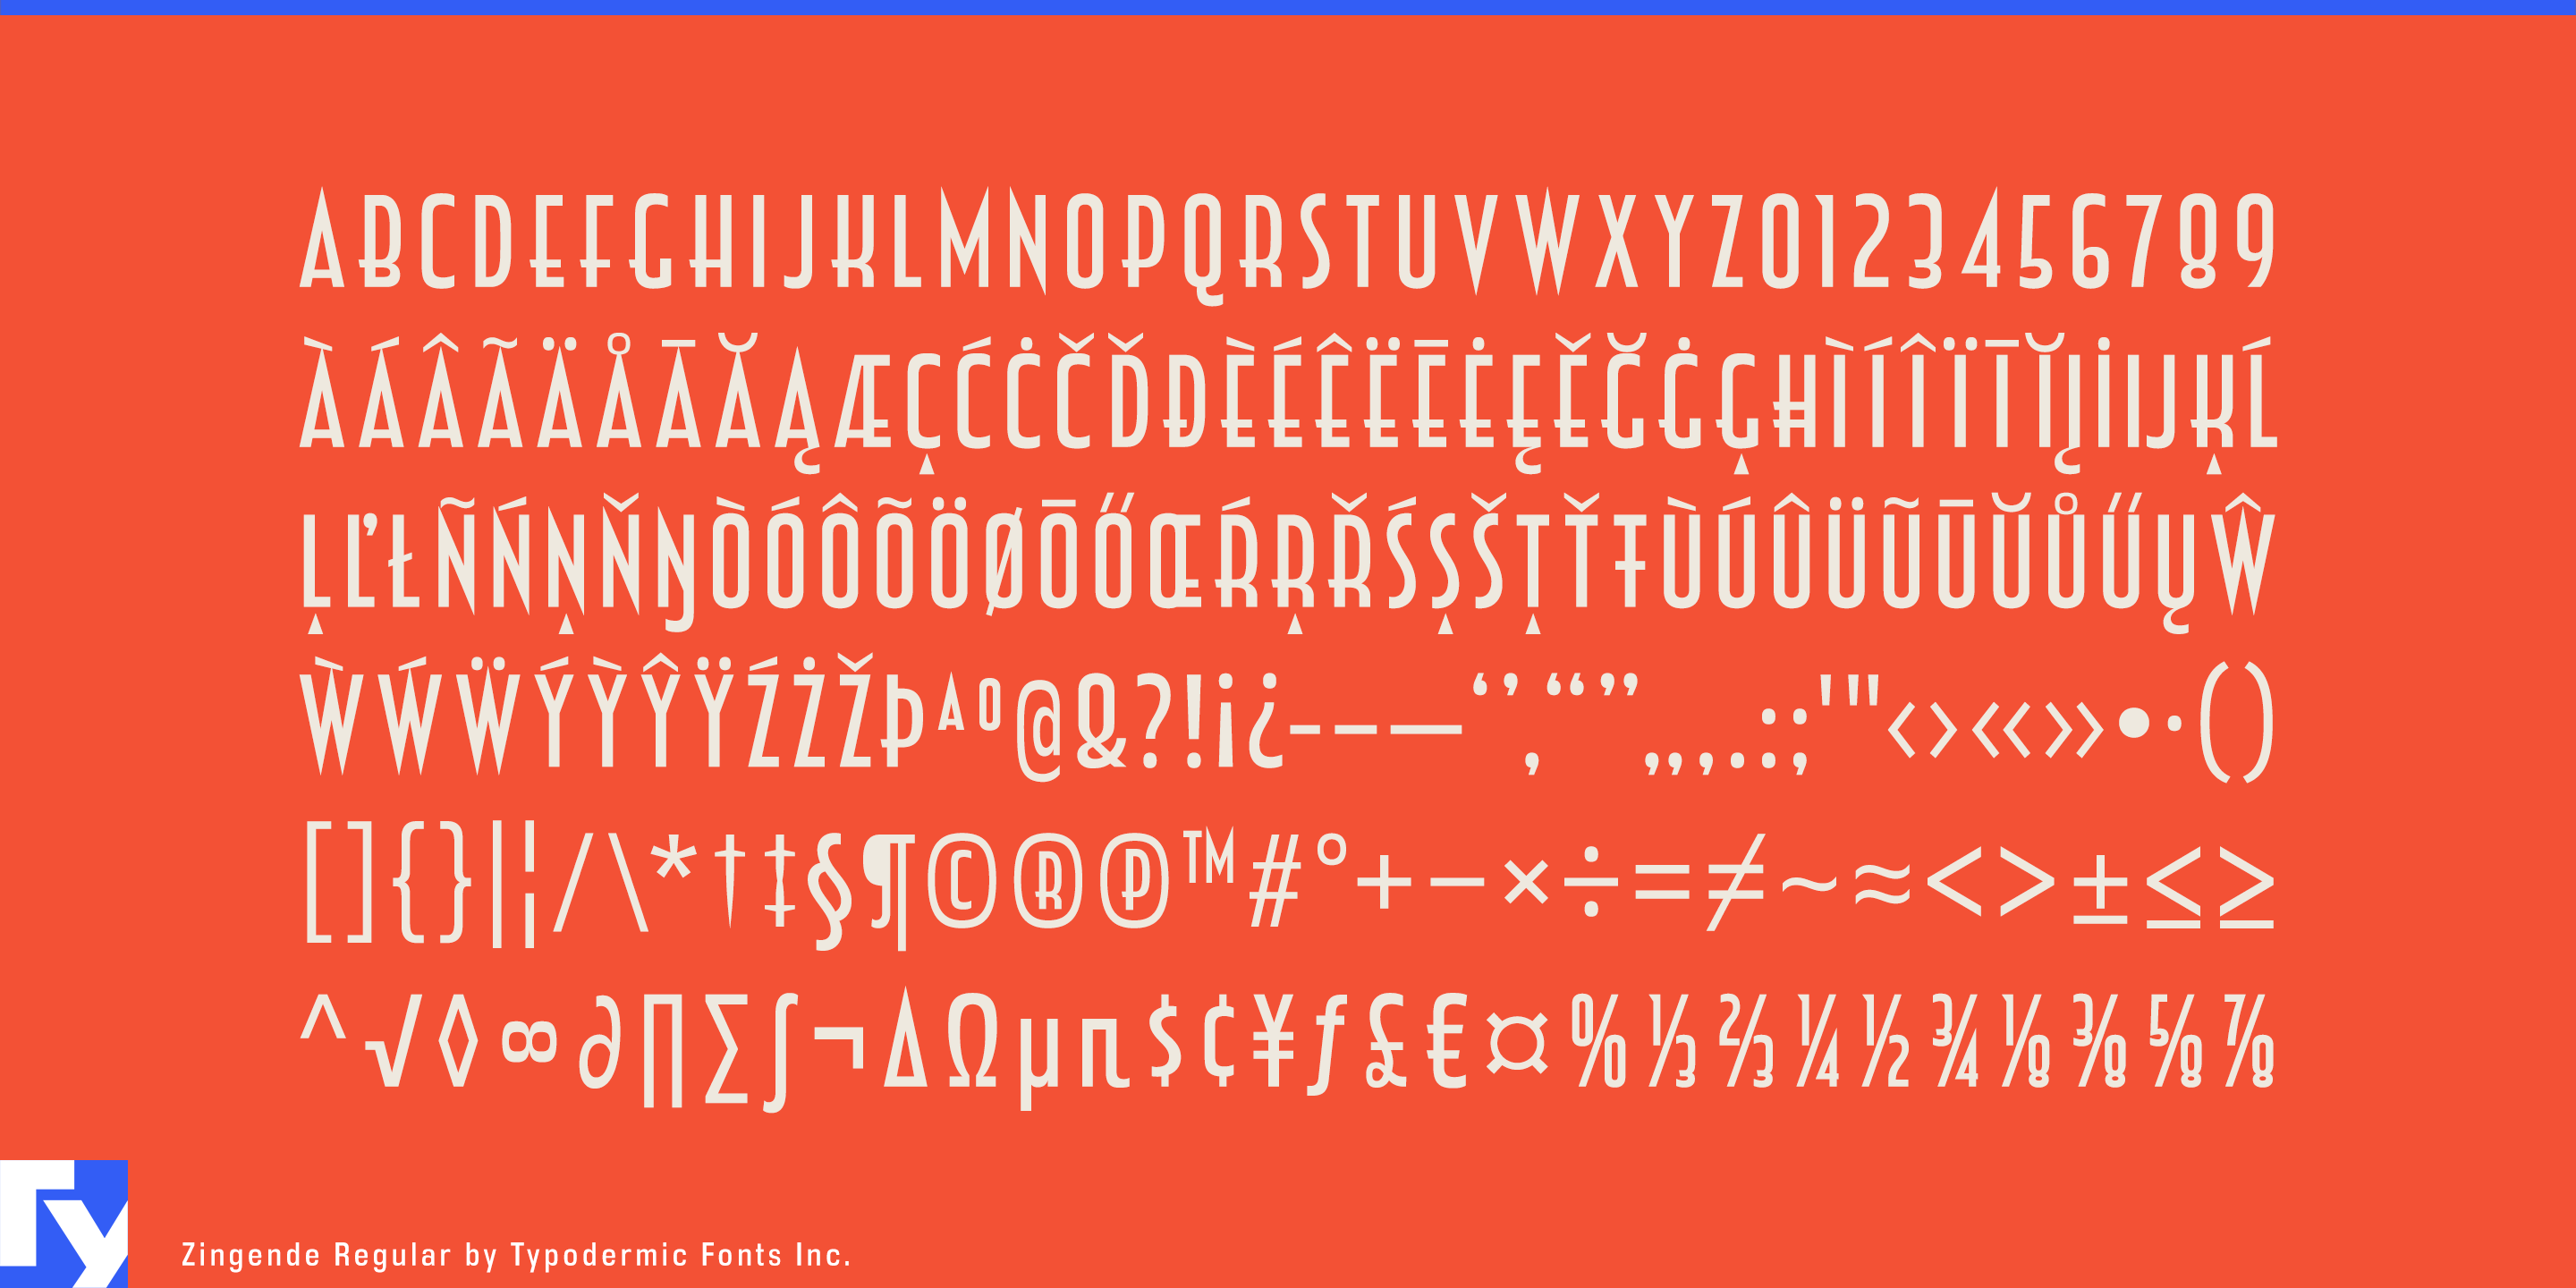 Stylish Art Deco Typeface Takes Center Stage: Zingende in Action